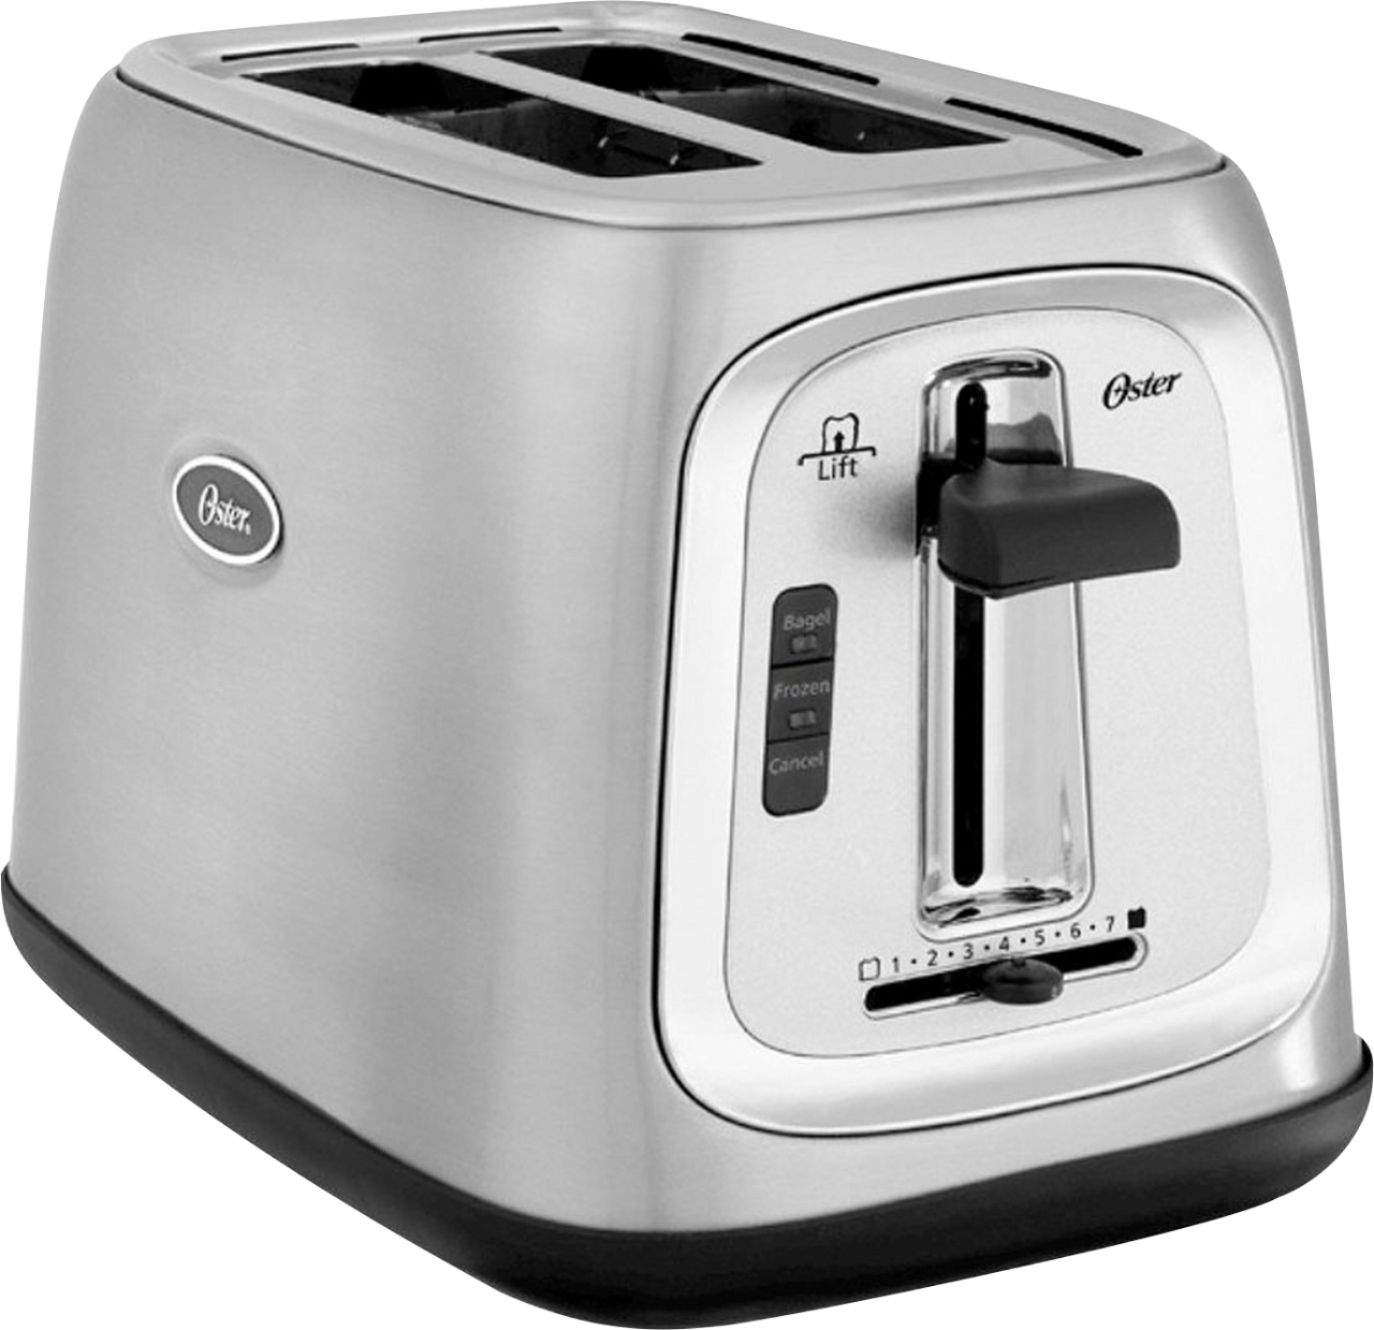 Oster 2-Slice Toaster #TSSTTRJB29 Review, Price and Features